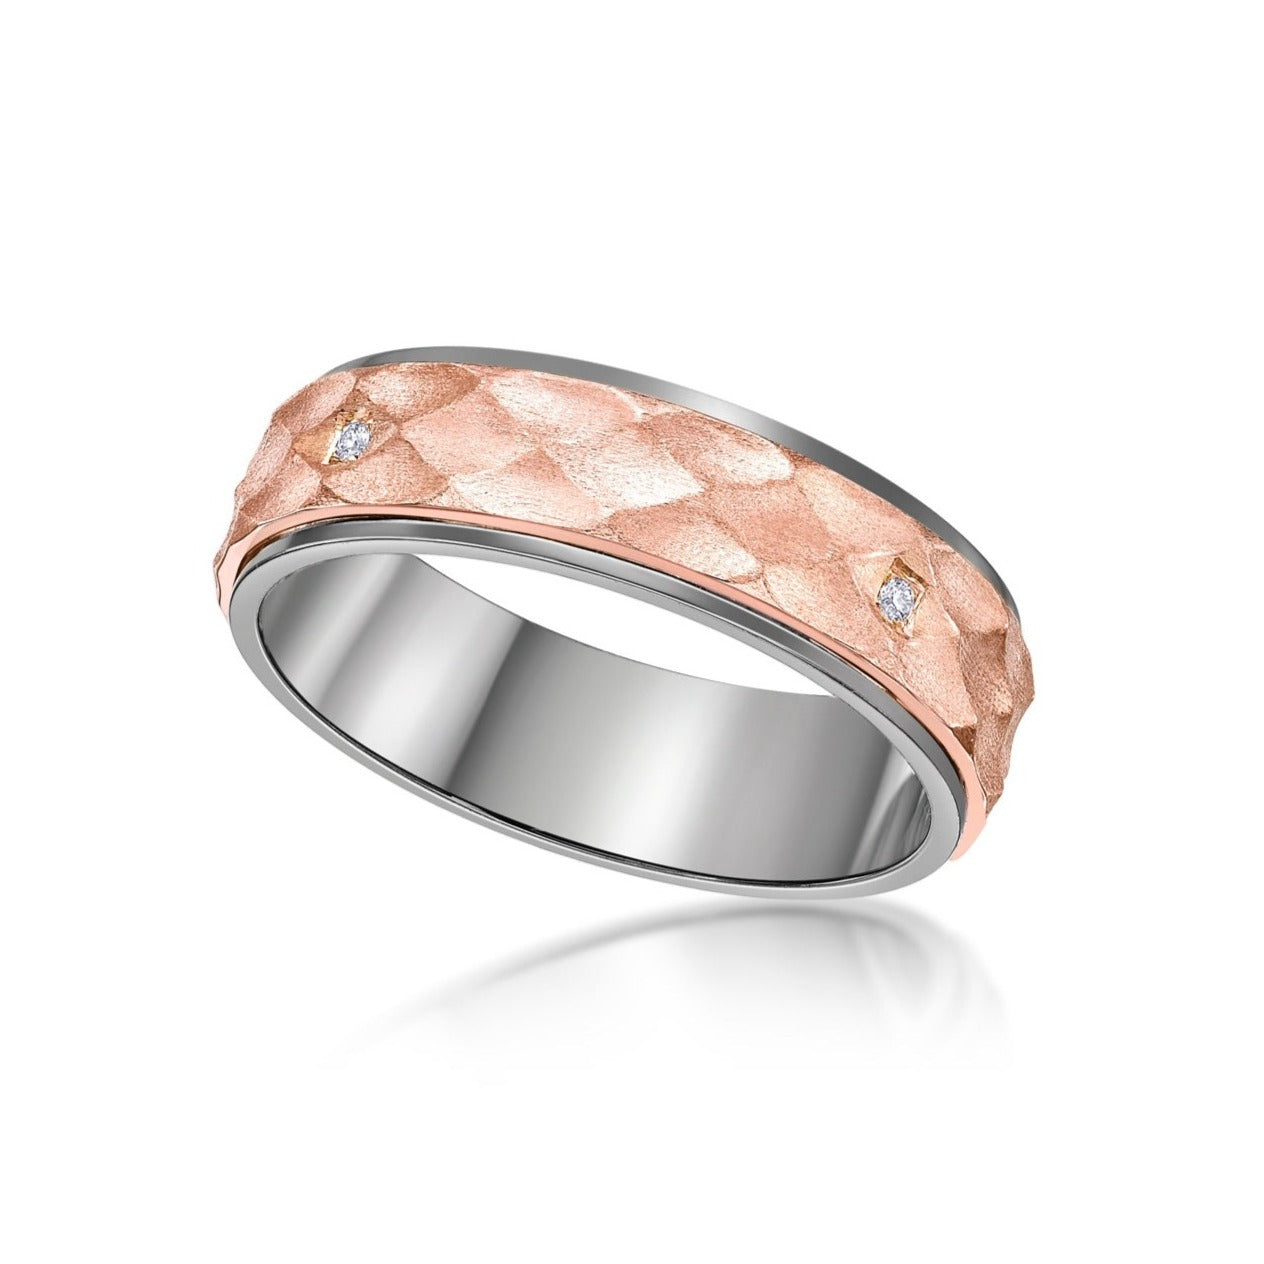 Men's Wedding Band- Mixed Metal Ring using 18K White & Rose Gold, textured inner strip set with round brilliant diamonds at North-East-South-West position, and 18K White Gold polished edges with black rhodium finish